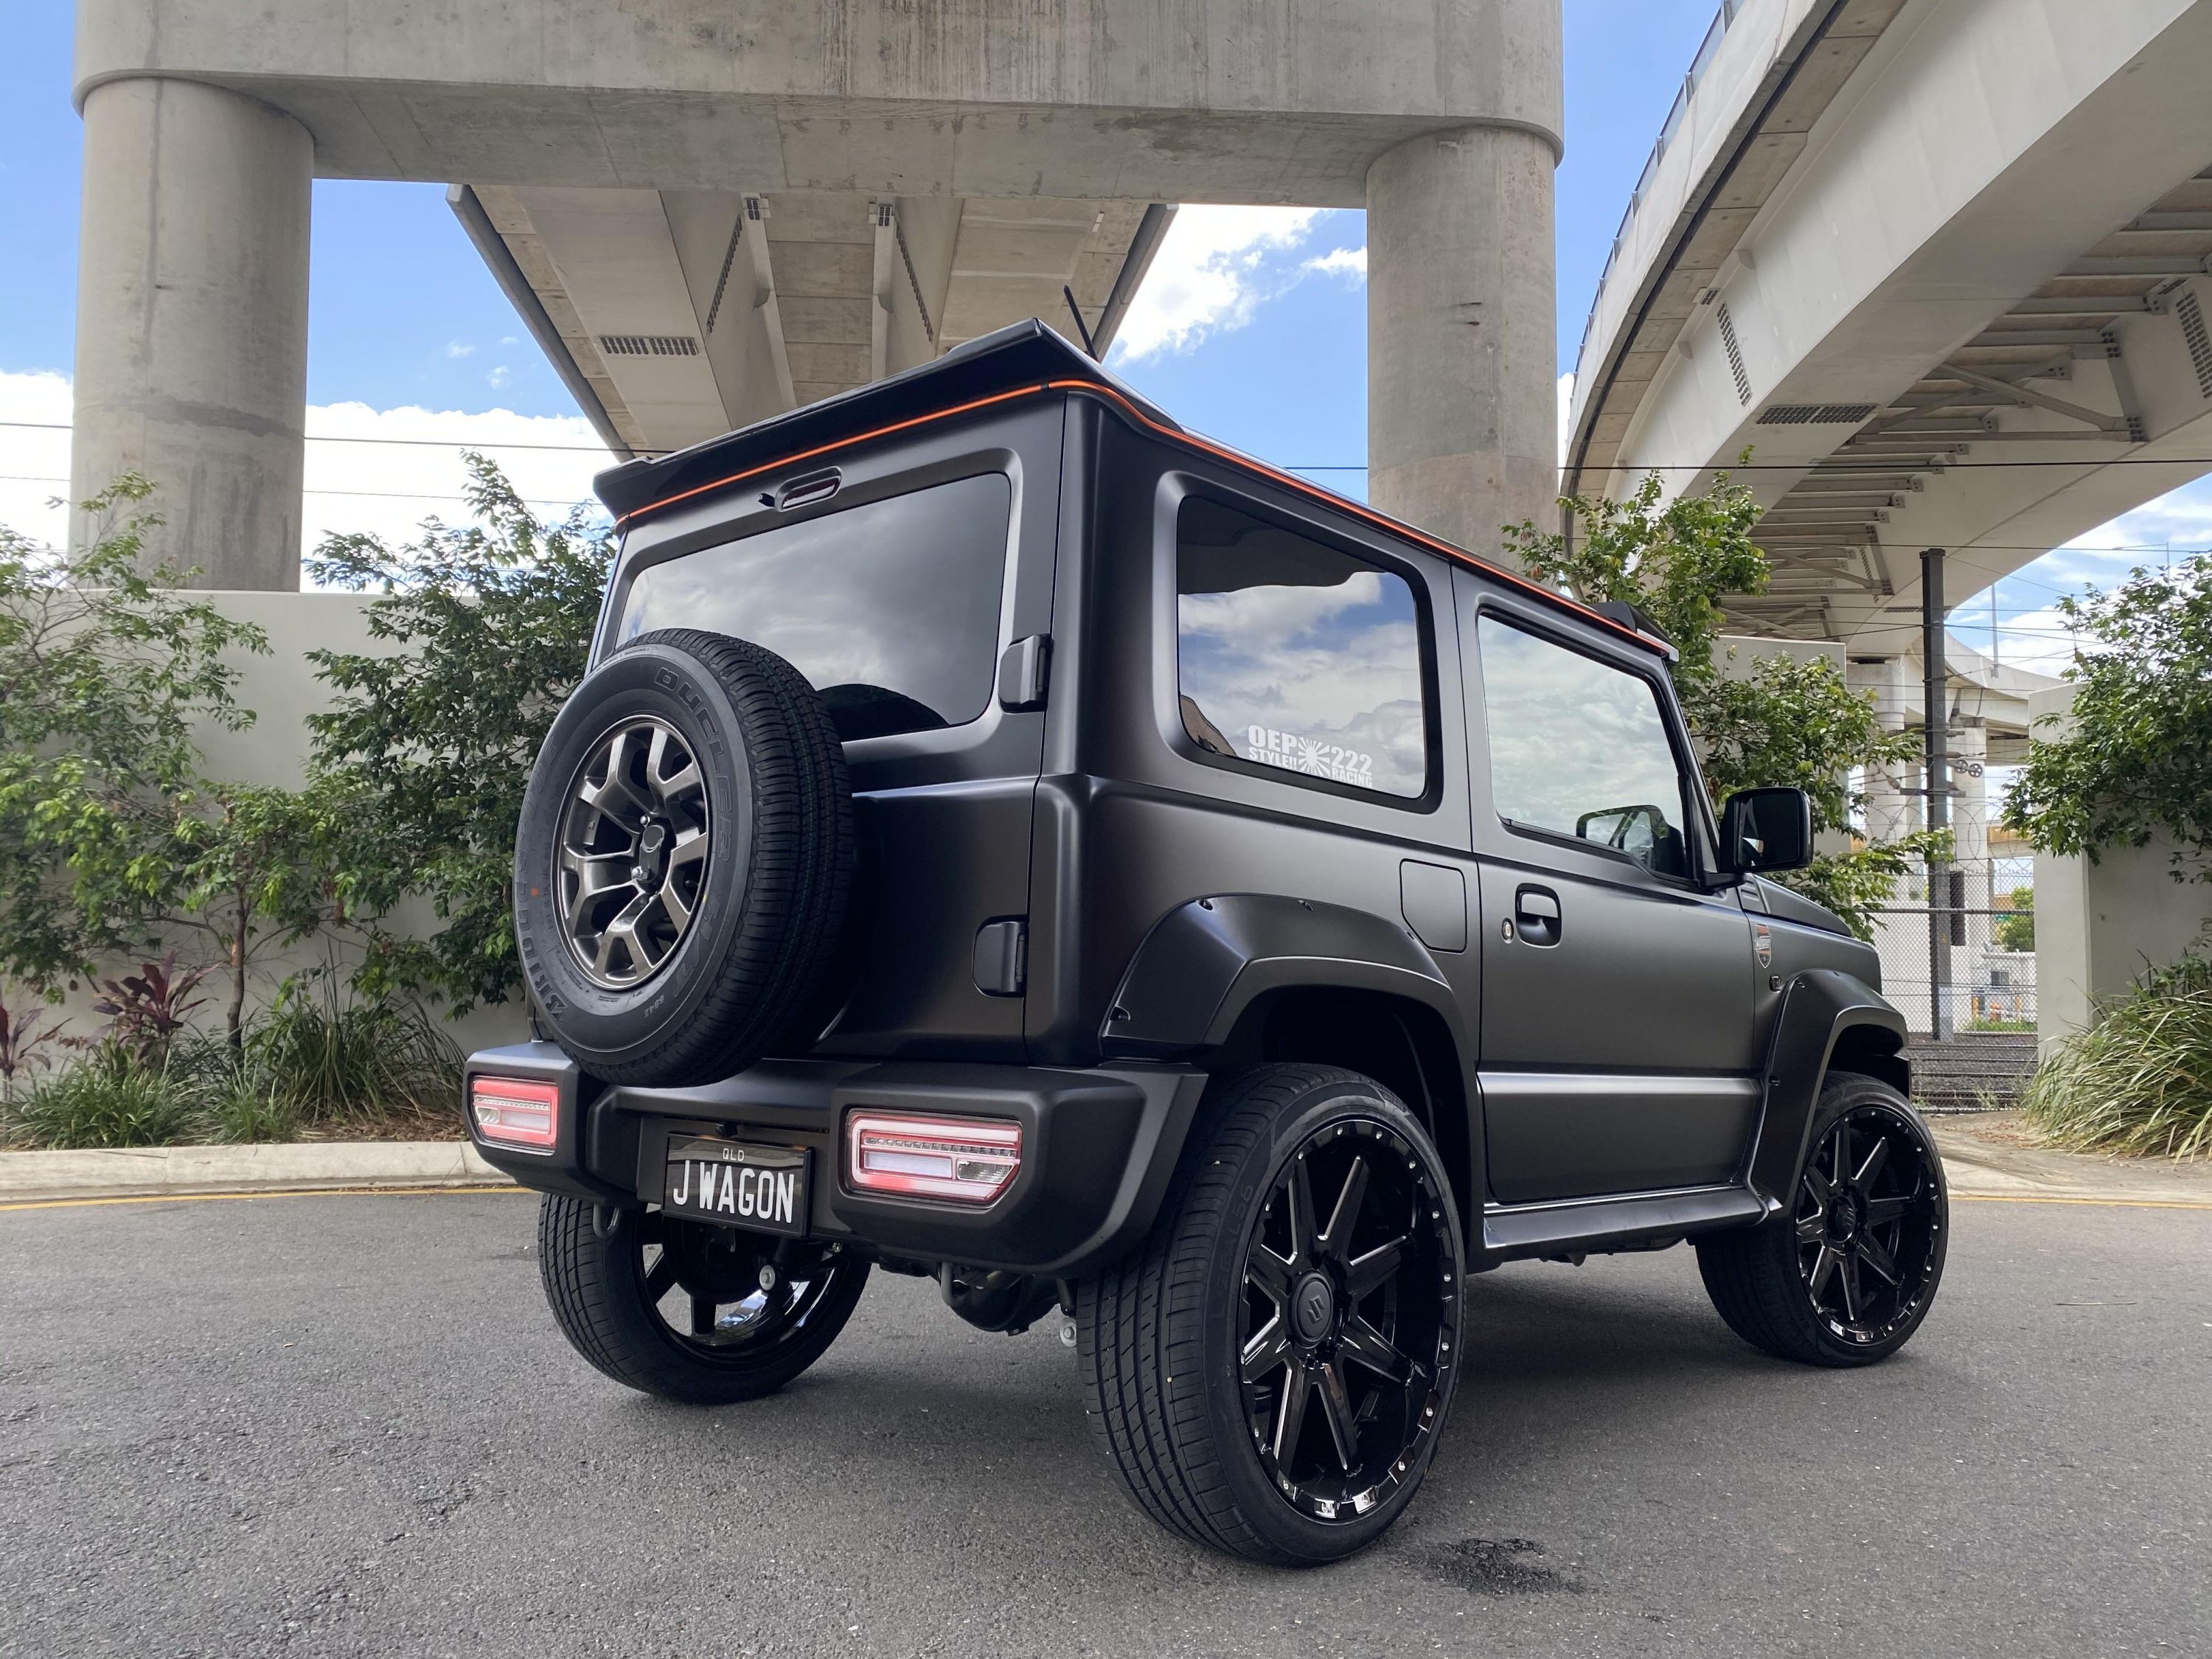 Liberty Walk Jimny! The mini G-Wagon from Japan, built in South Africa 